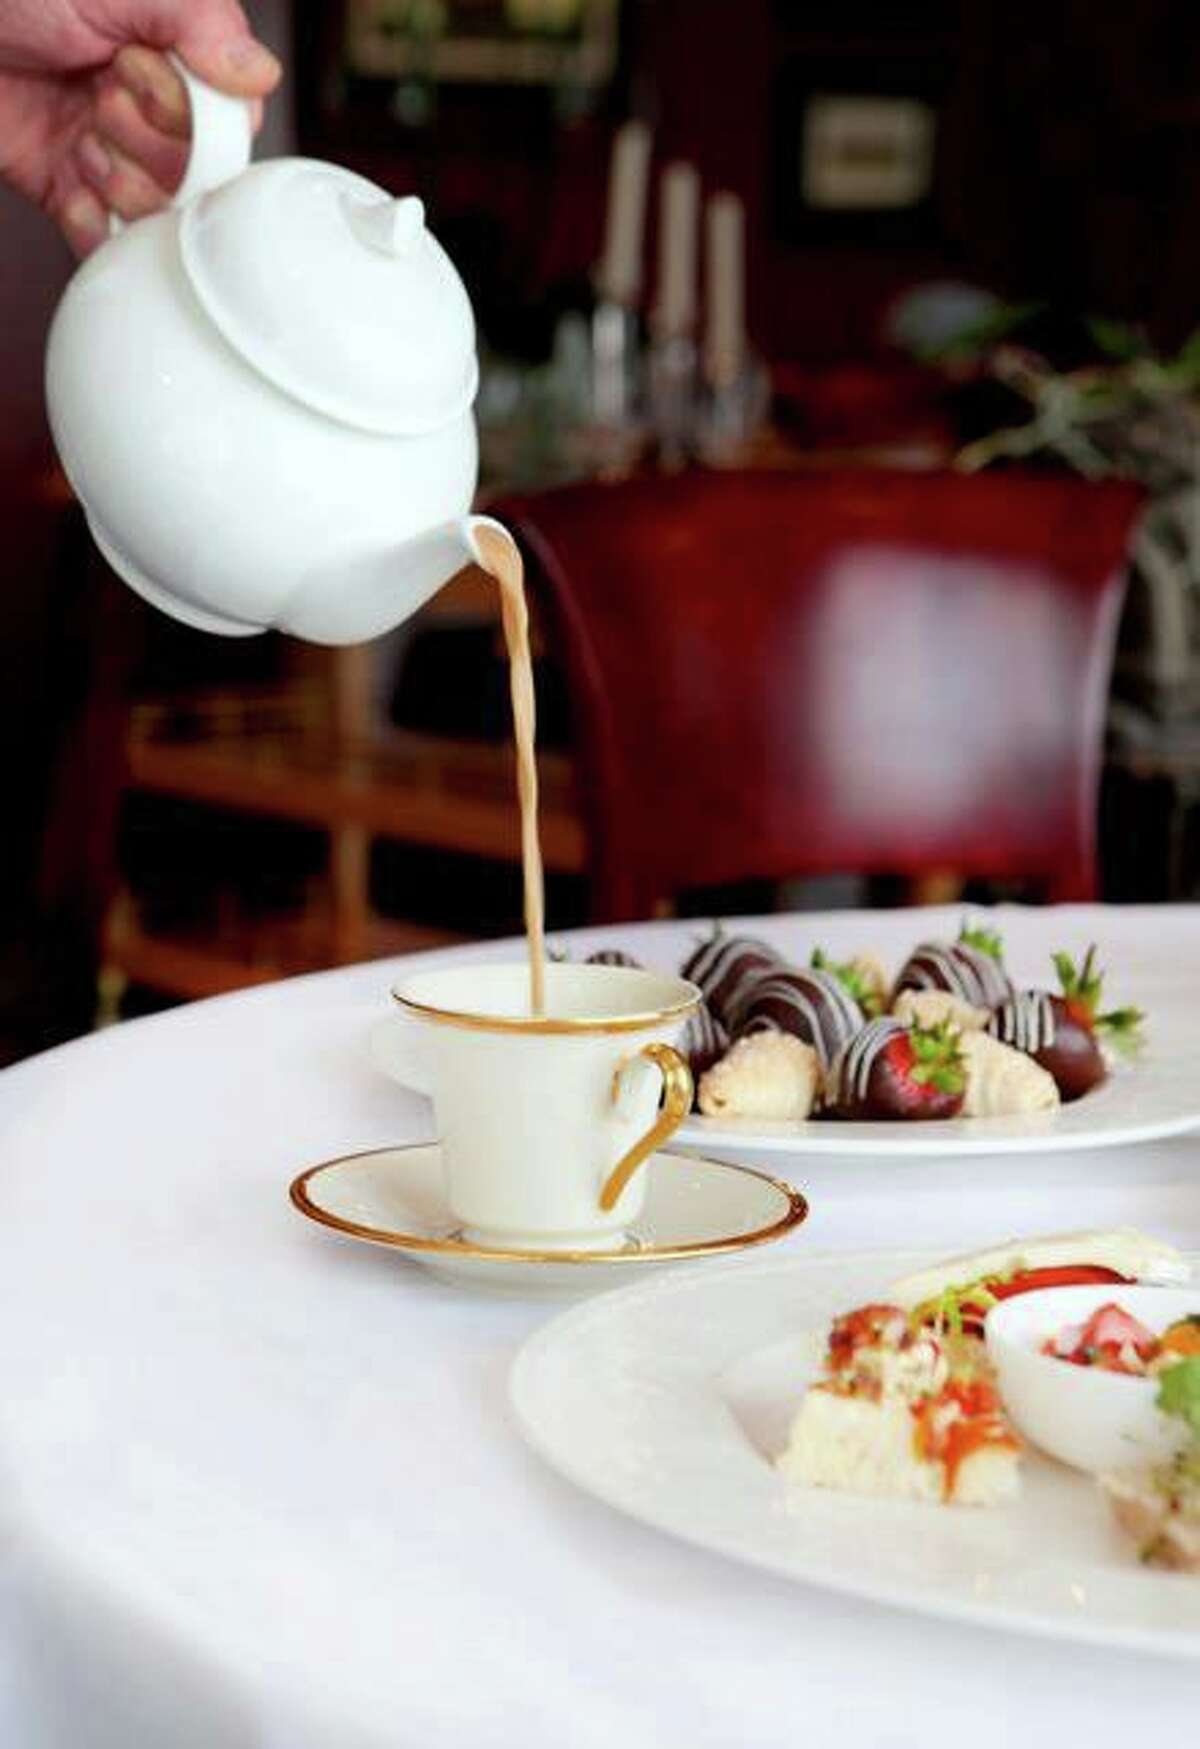 Kiran’s is one of the few Houston restaurants offering formal afternoon tea service.